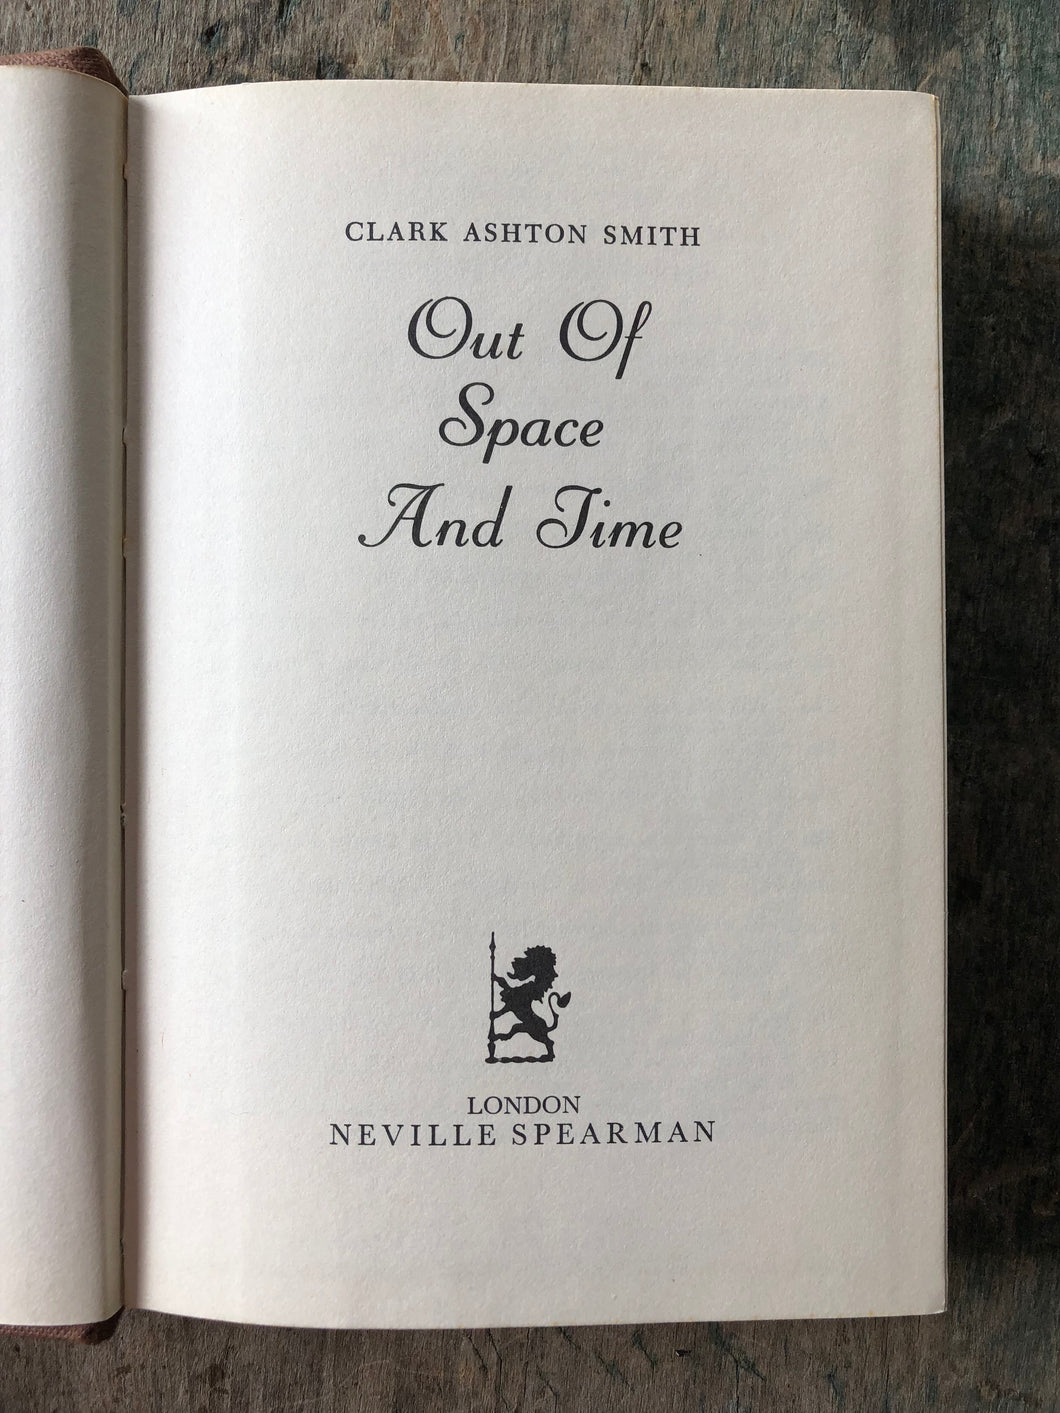 Out of Space and Time by Clark Ashton Smith